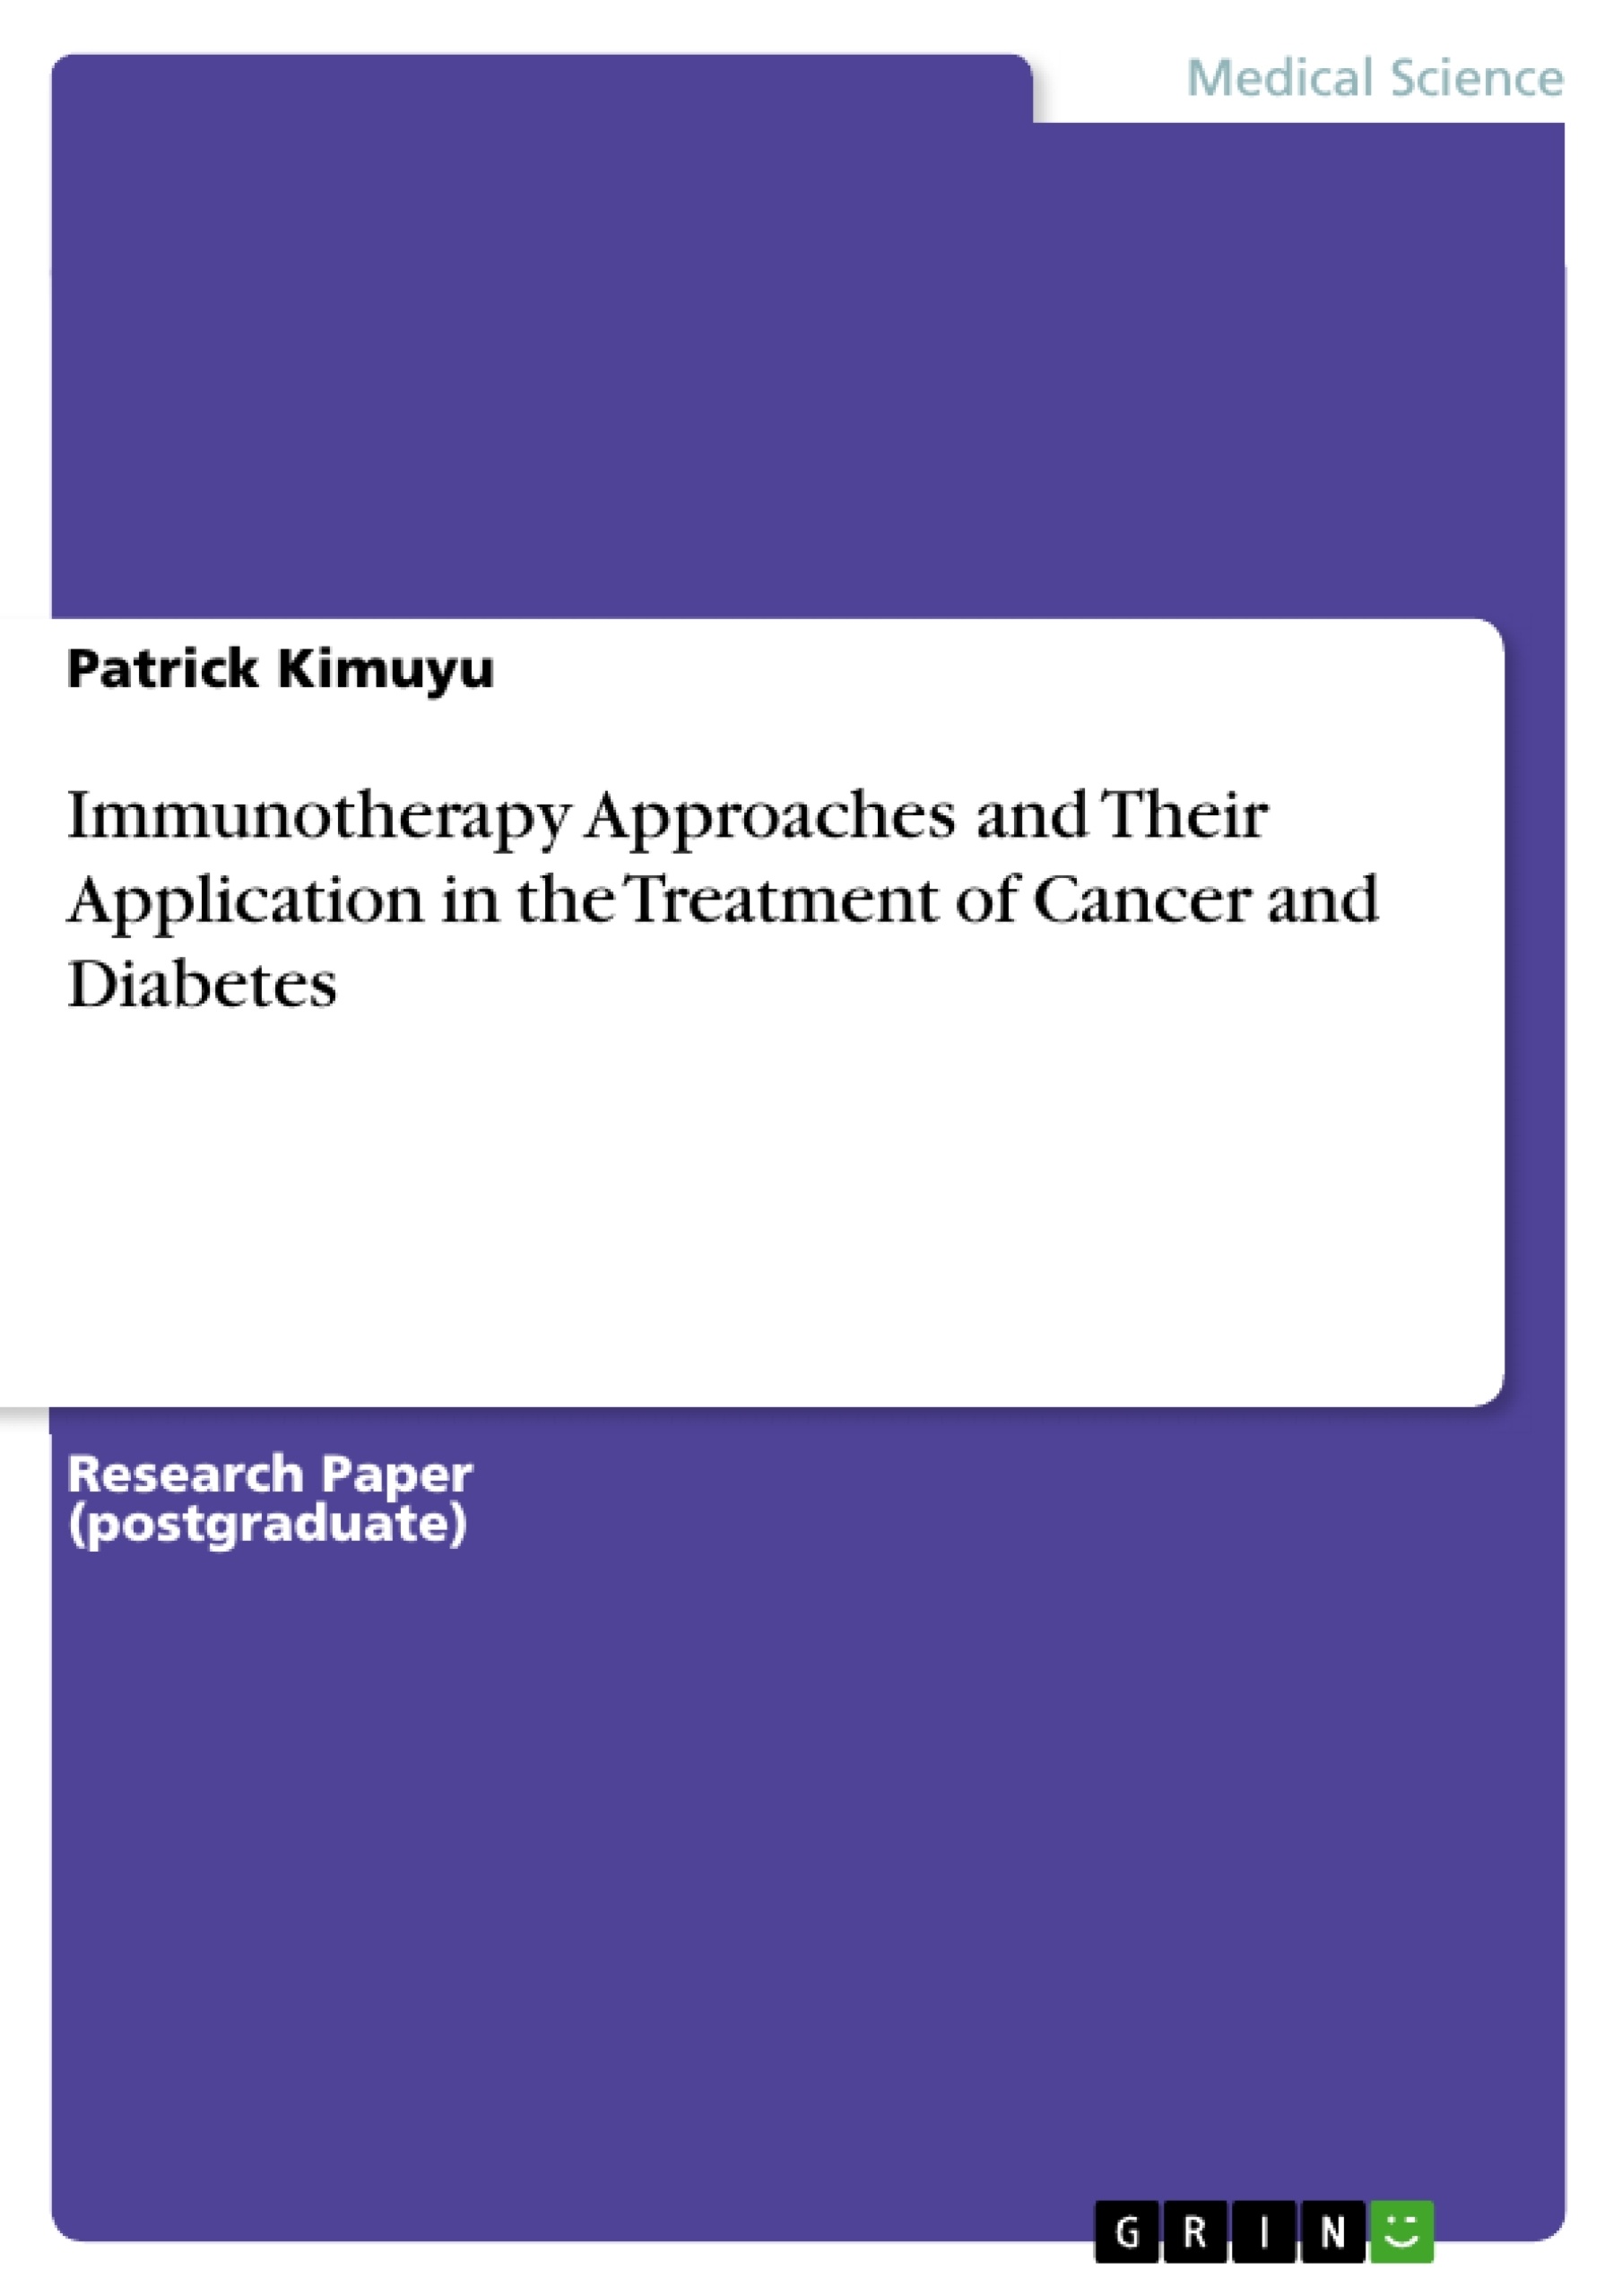 Título: Immunotherapy Approaches and Their Application in the Treatment of Cancer and Diabetes